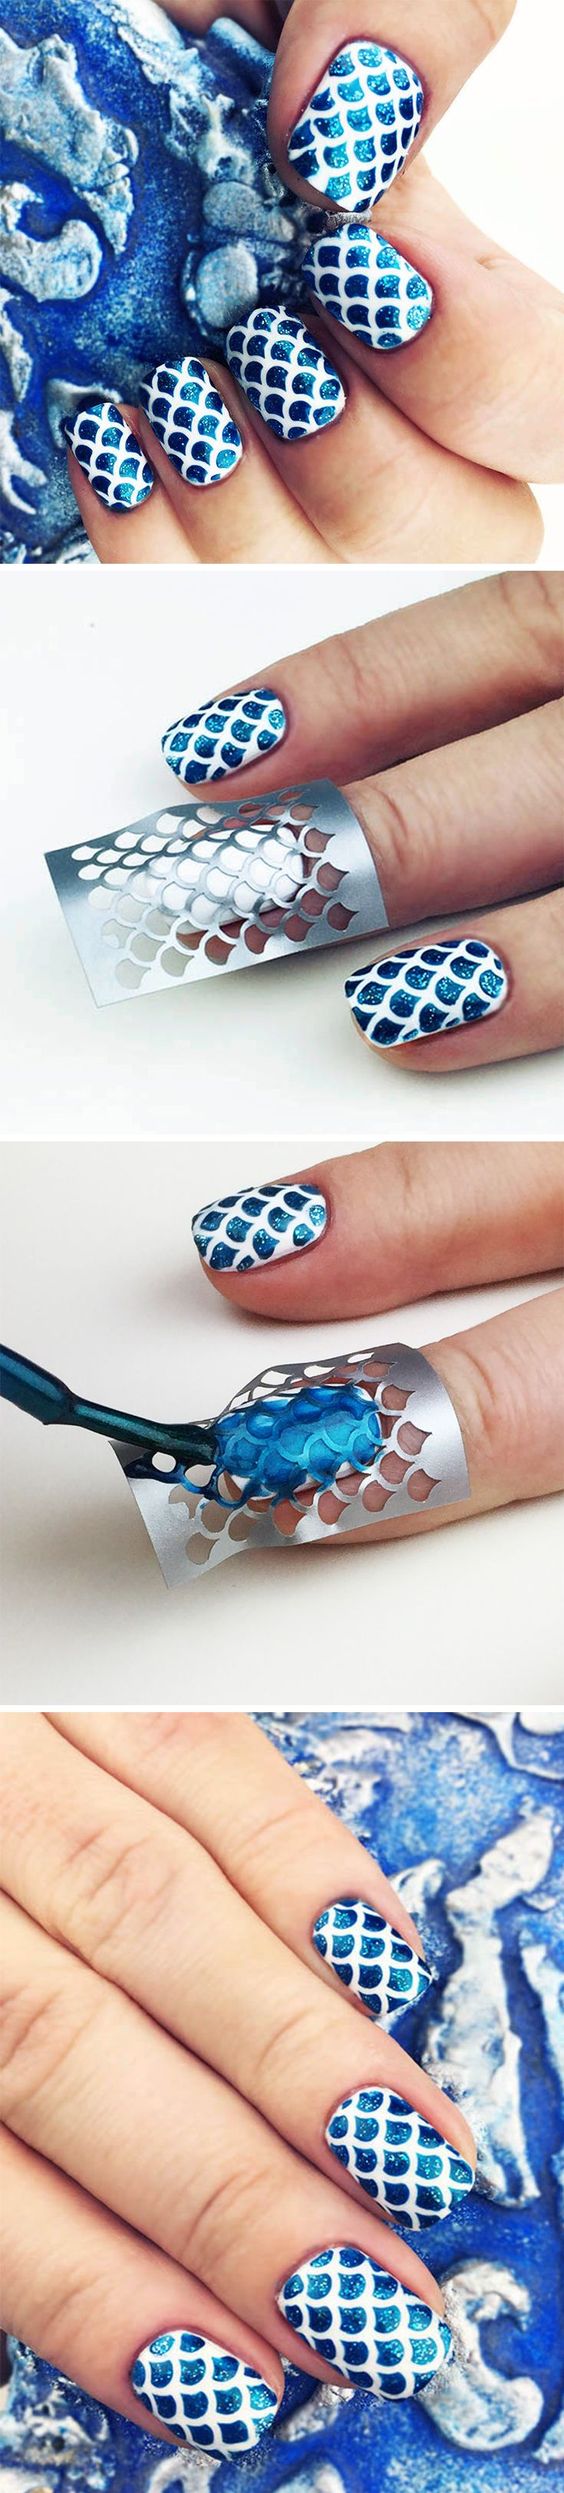 Do It Yourself Acrylic Nails | BMNE Direct